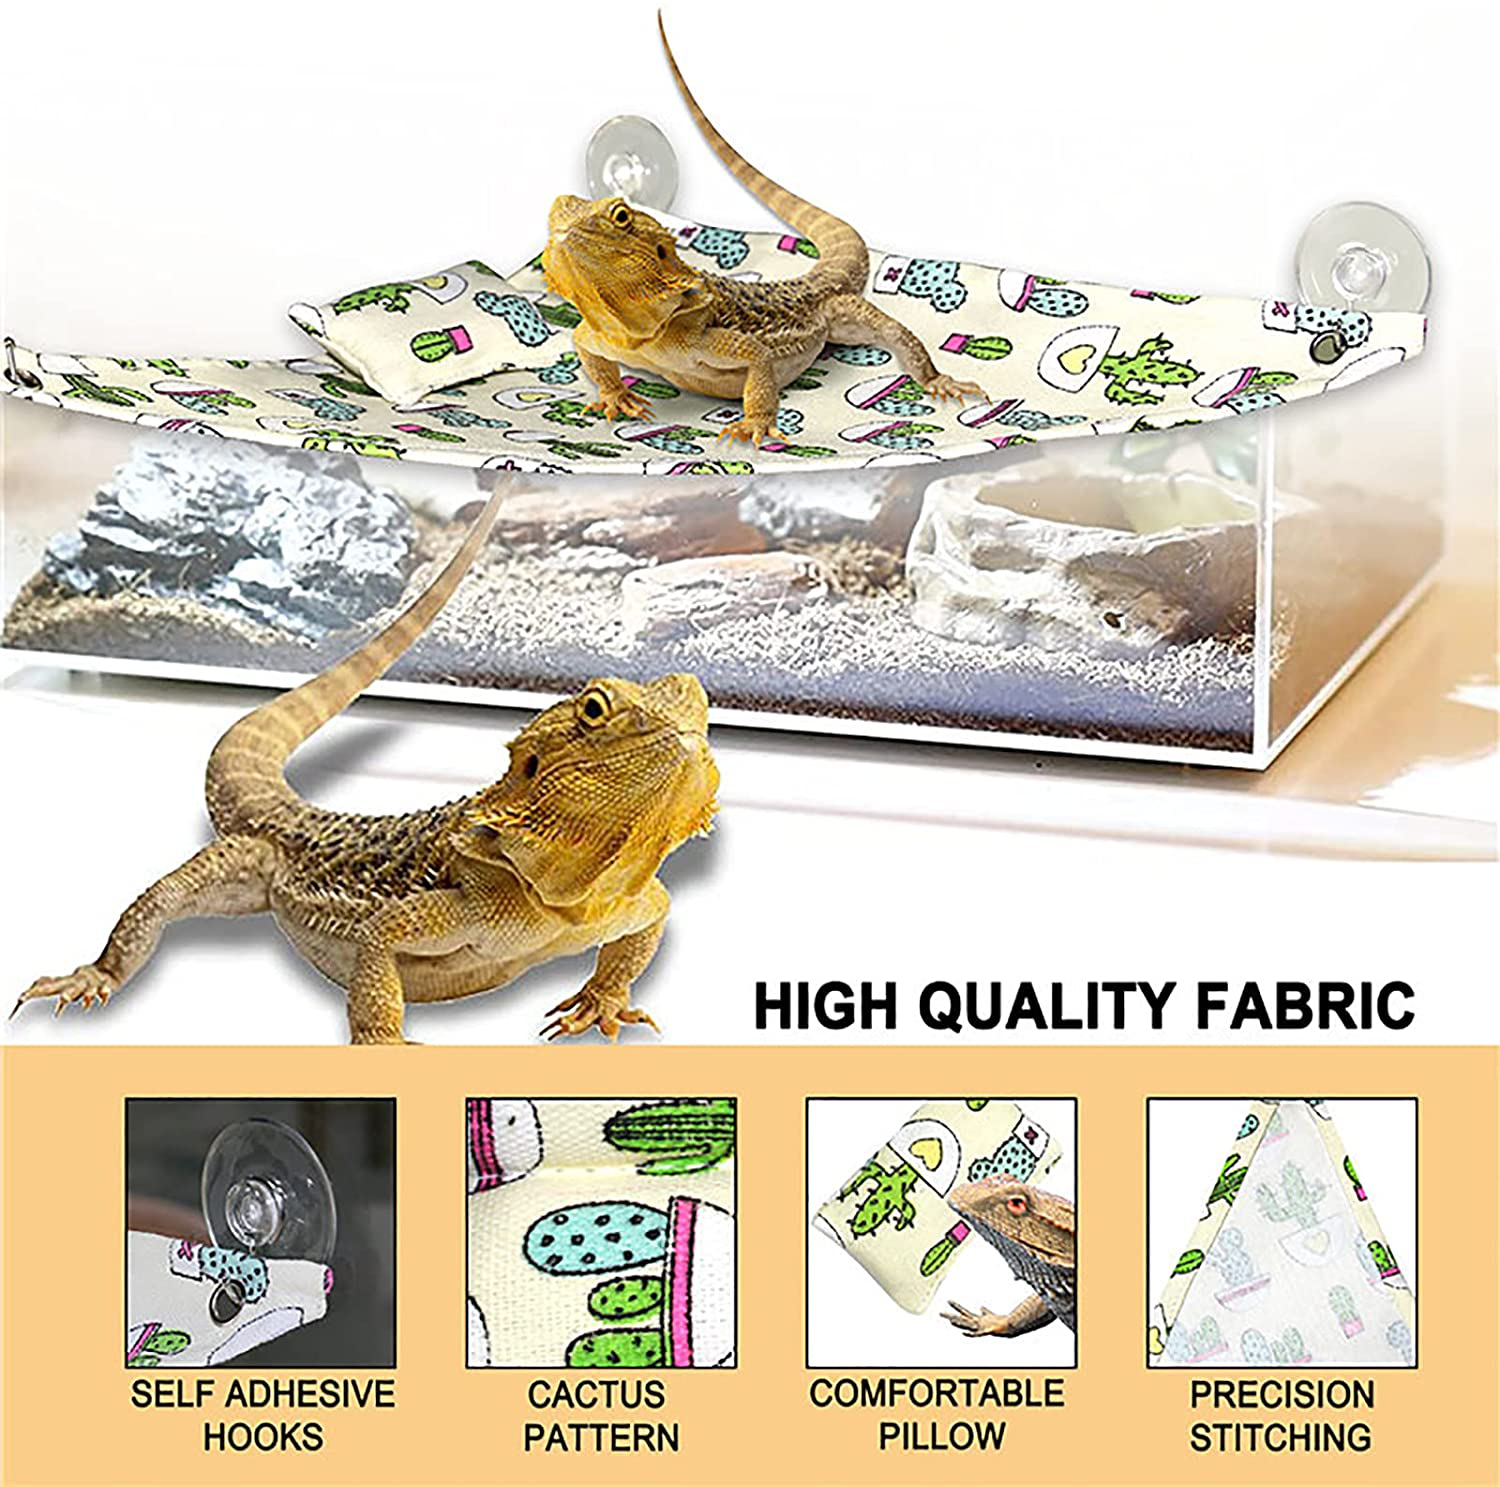 Reptile Lizard Hammock, Bearded Dragon Lounger Ladder Swing Hanging Pet Bed with Adhesive Suction Cup Pillow Triangular Amphibian Terrarium Habitat Decor Accessories for Chameleon Snake Gecko Anole Animals & Pet Supplies > Pet Supplies > Reptile & Amphibian Supplies > Reptile & Amphibian Habitat Accessories LeLePet   